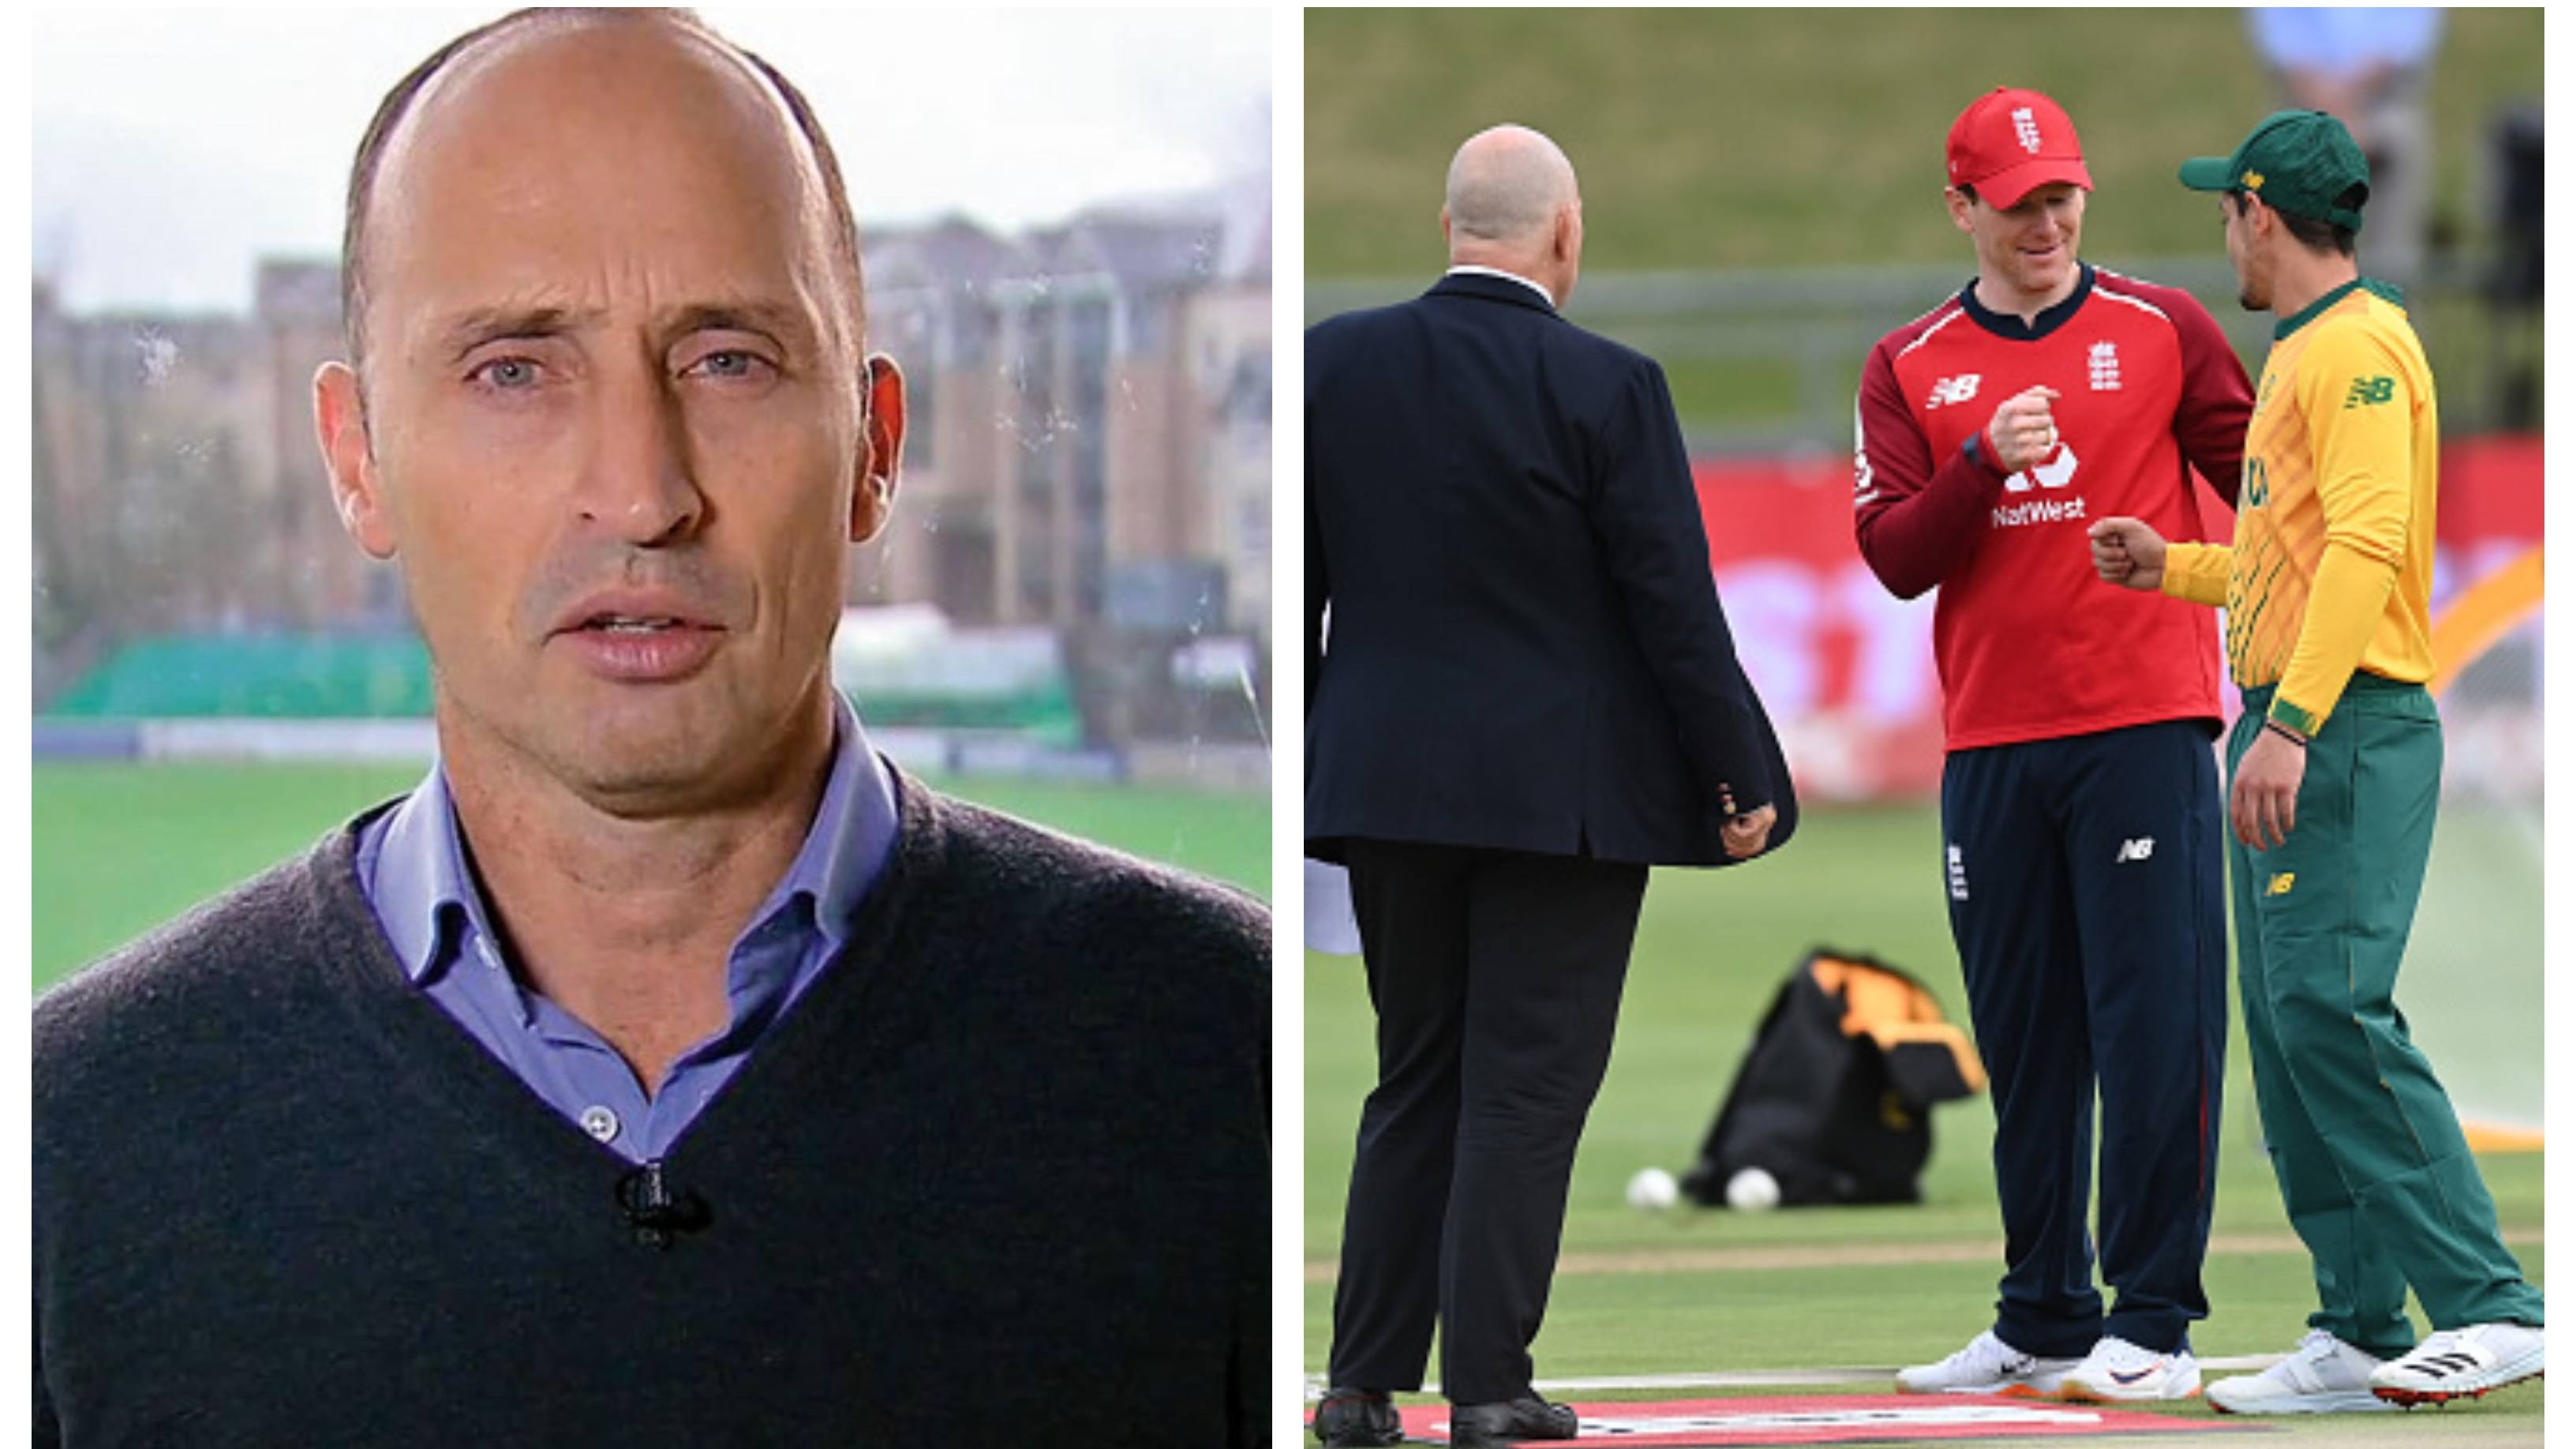 SA v ENG 2020: Nasser Hussain expresses surprise as England ended tour in South Africa's hour of need